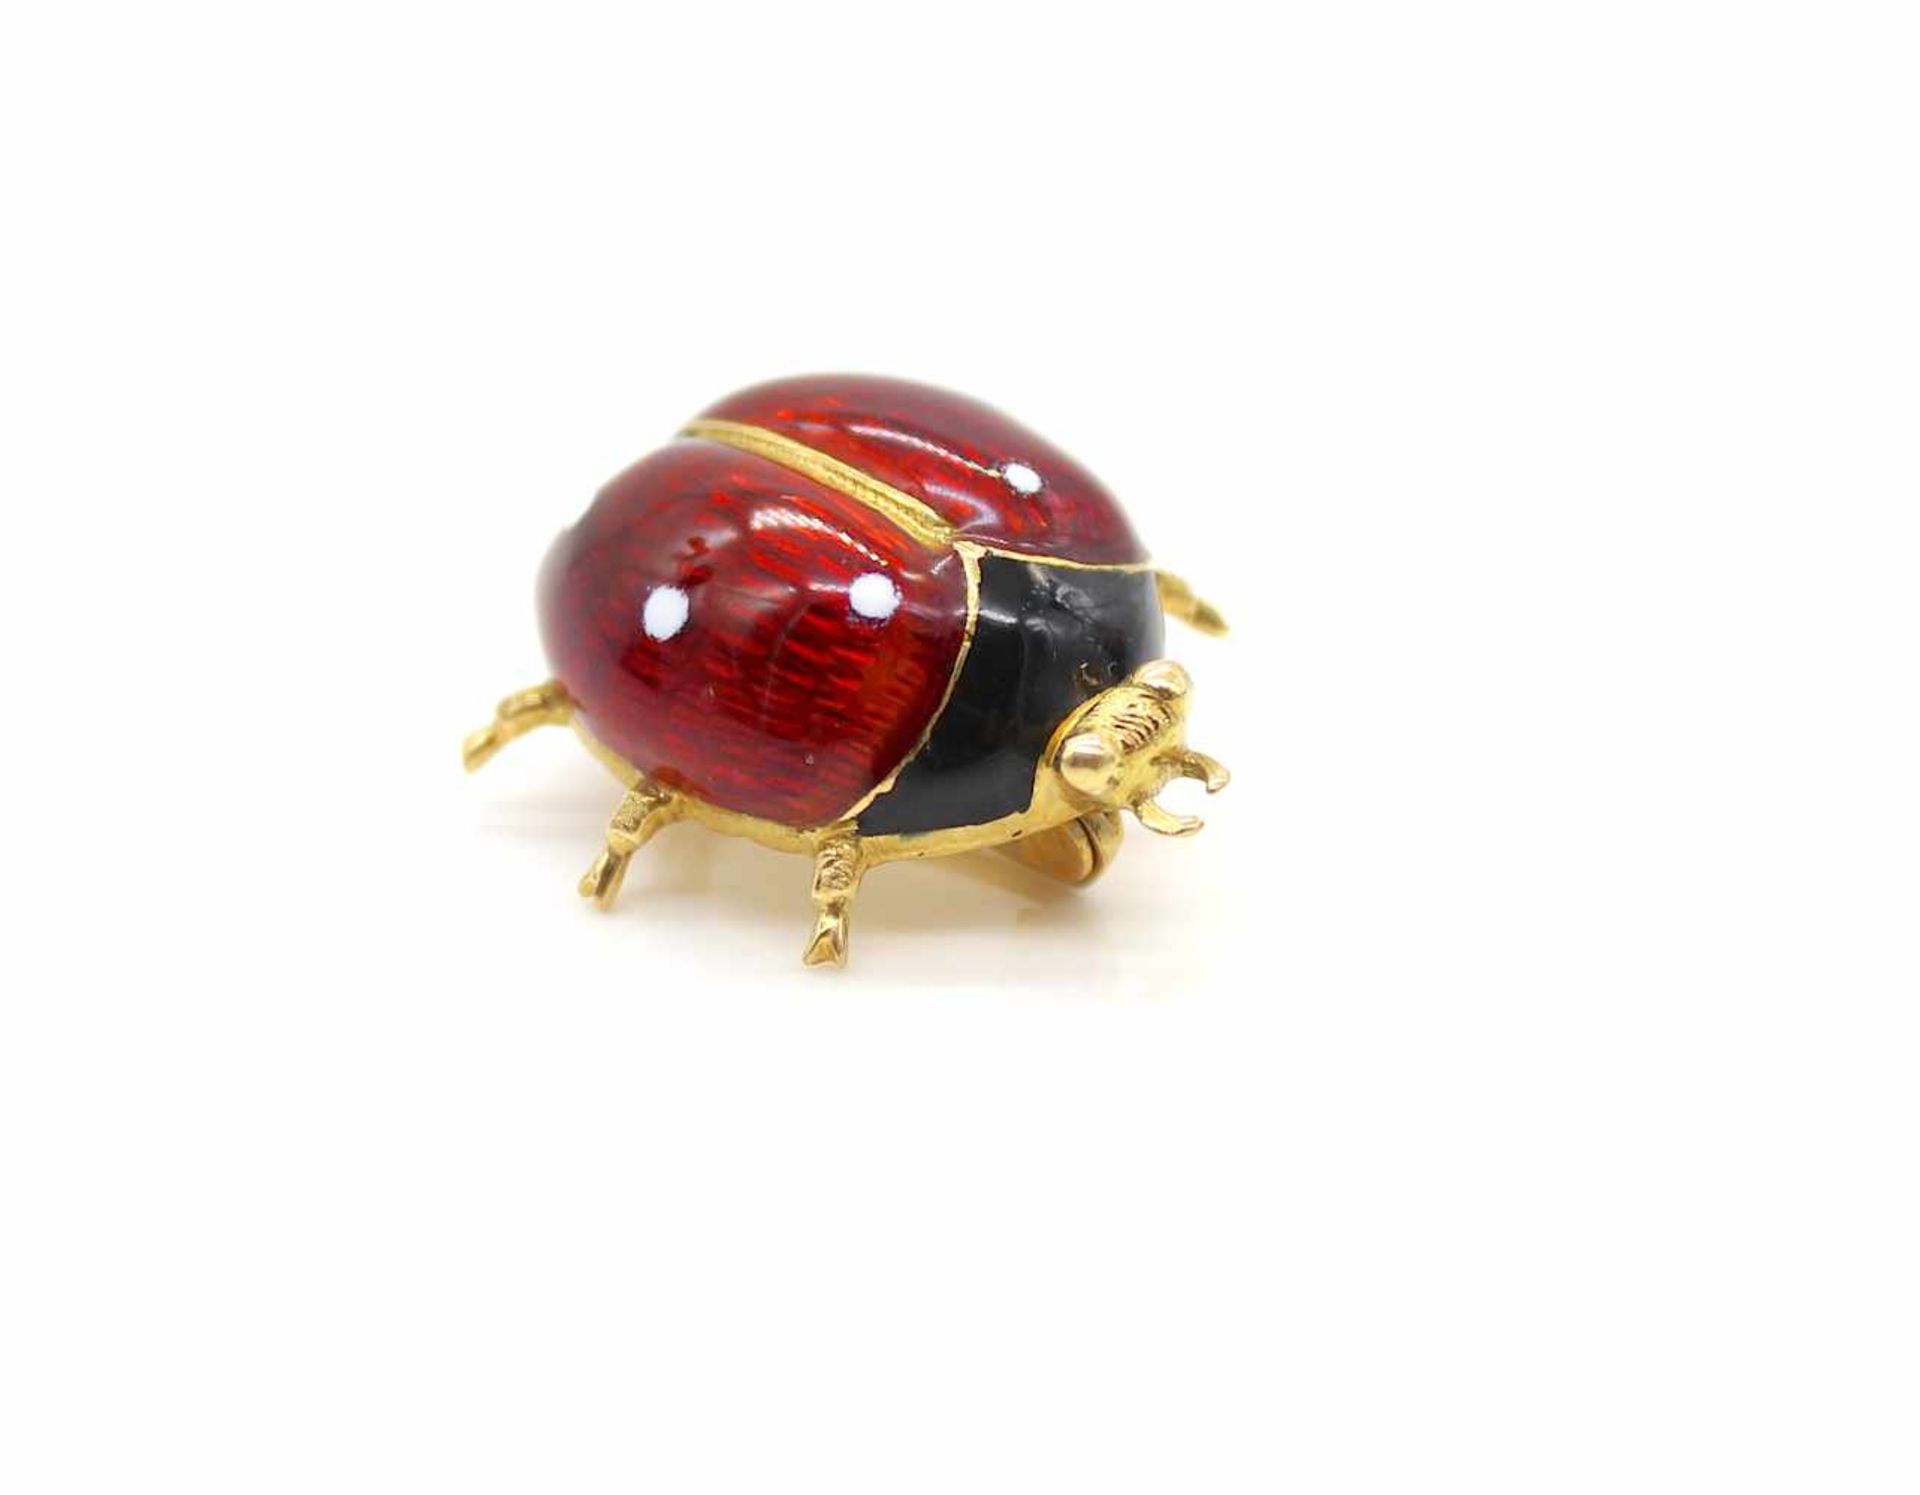 750 gold brooch with enamel.weight 10,2 g, dimensions : 20 x 17 x 9,5 mm- - -15.00 % buyer's premium